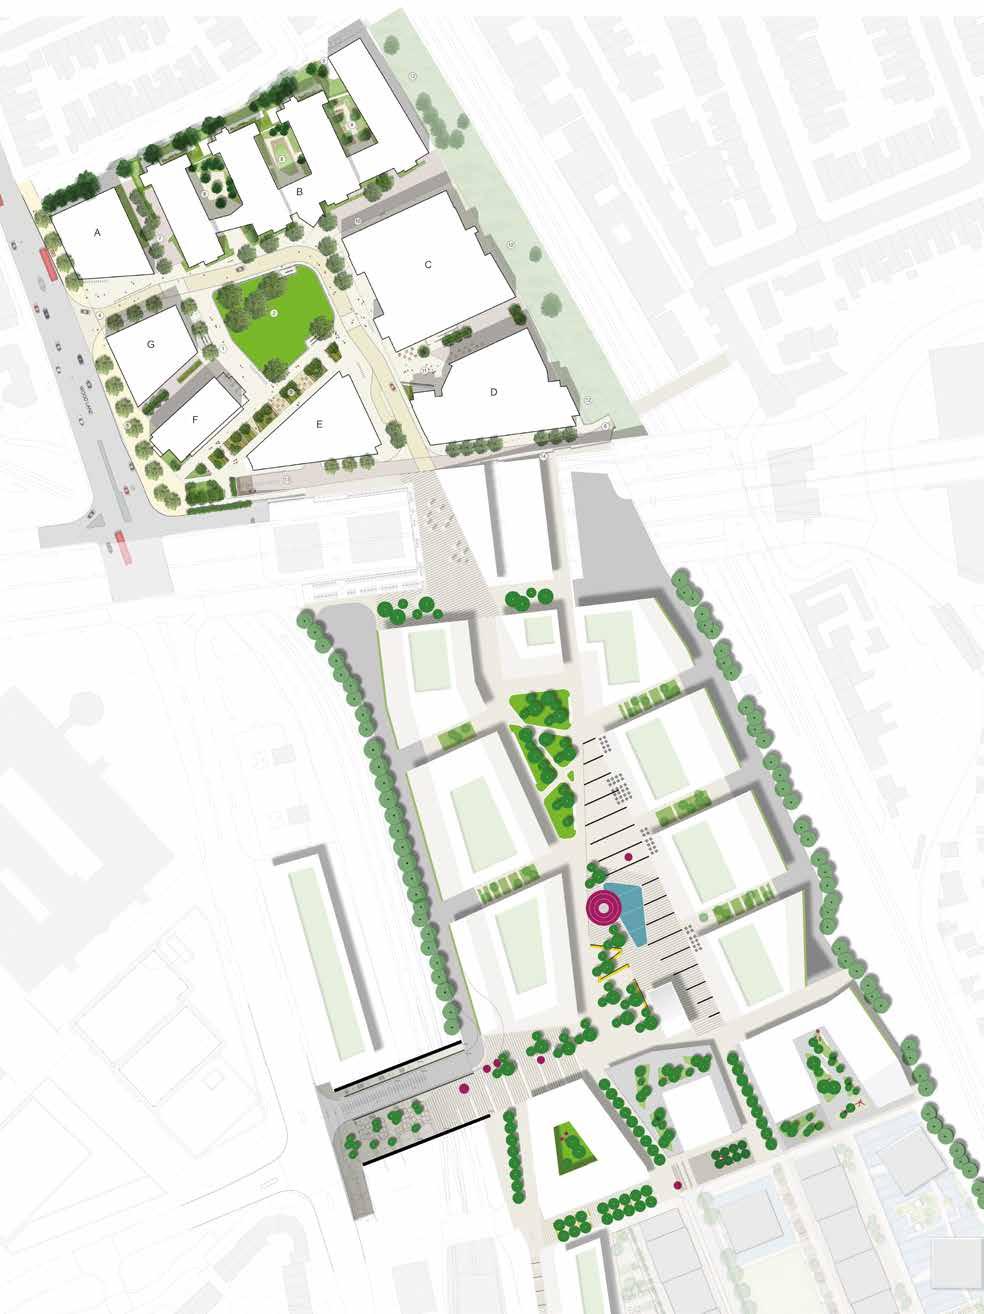 Public Public consultation on the the White White City City Campus UPDATED PLANS: AN OPEN, CONNECTED CAMPUS The White City Campus will be open to